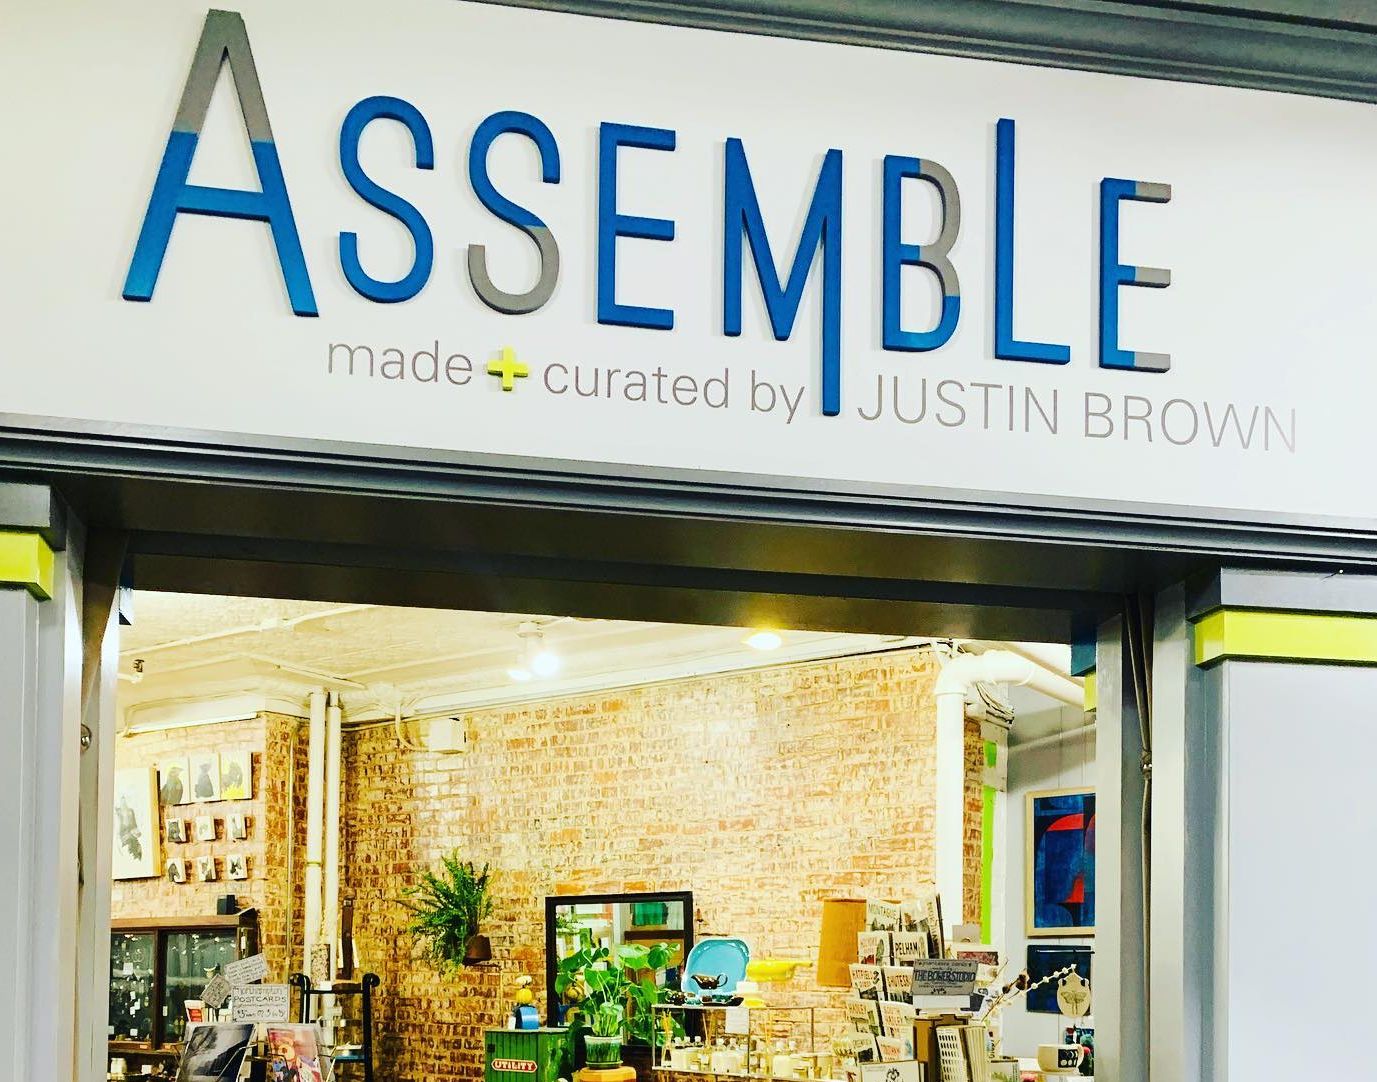 ASSEMBLE in Thornes is the perfect spot to find knick-knacks, jewelry, upcycled furniture, unique gifts and more.